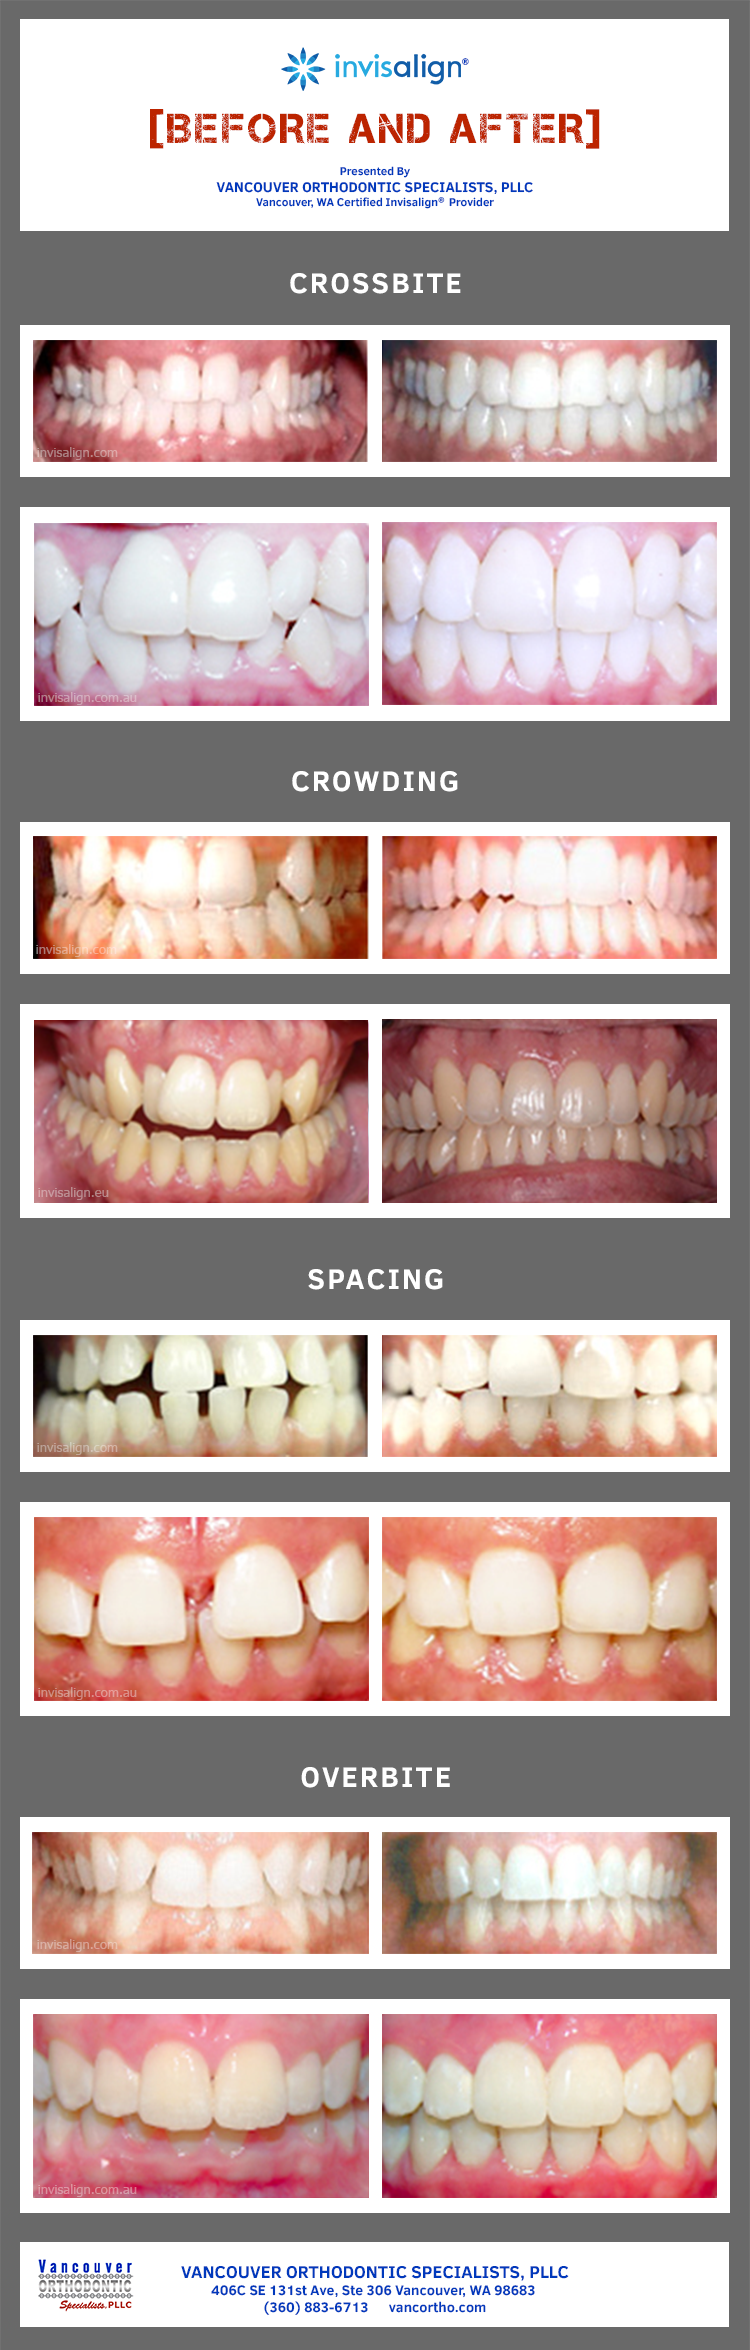 results of Invisalign orthodontic treatment